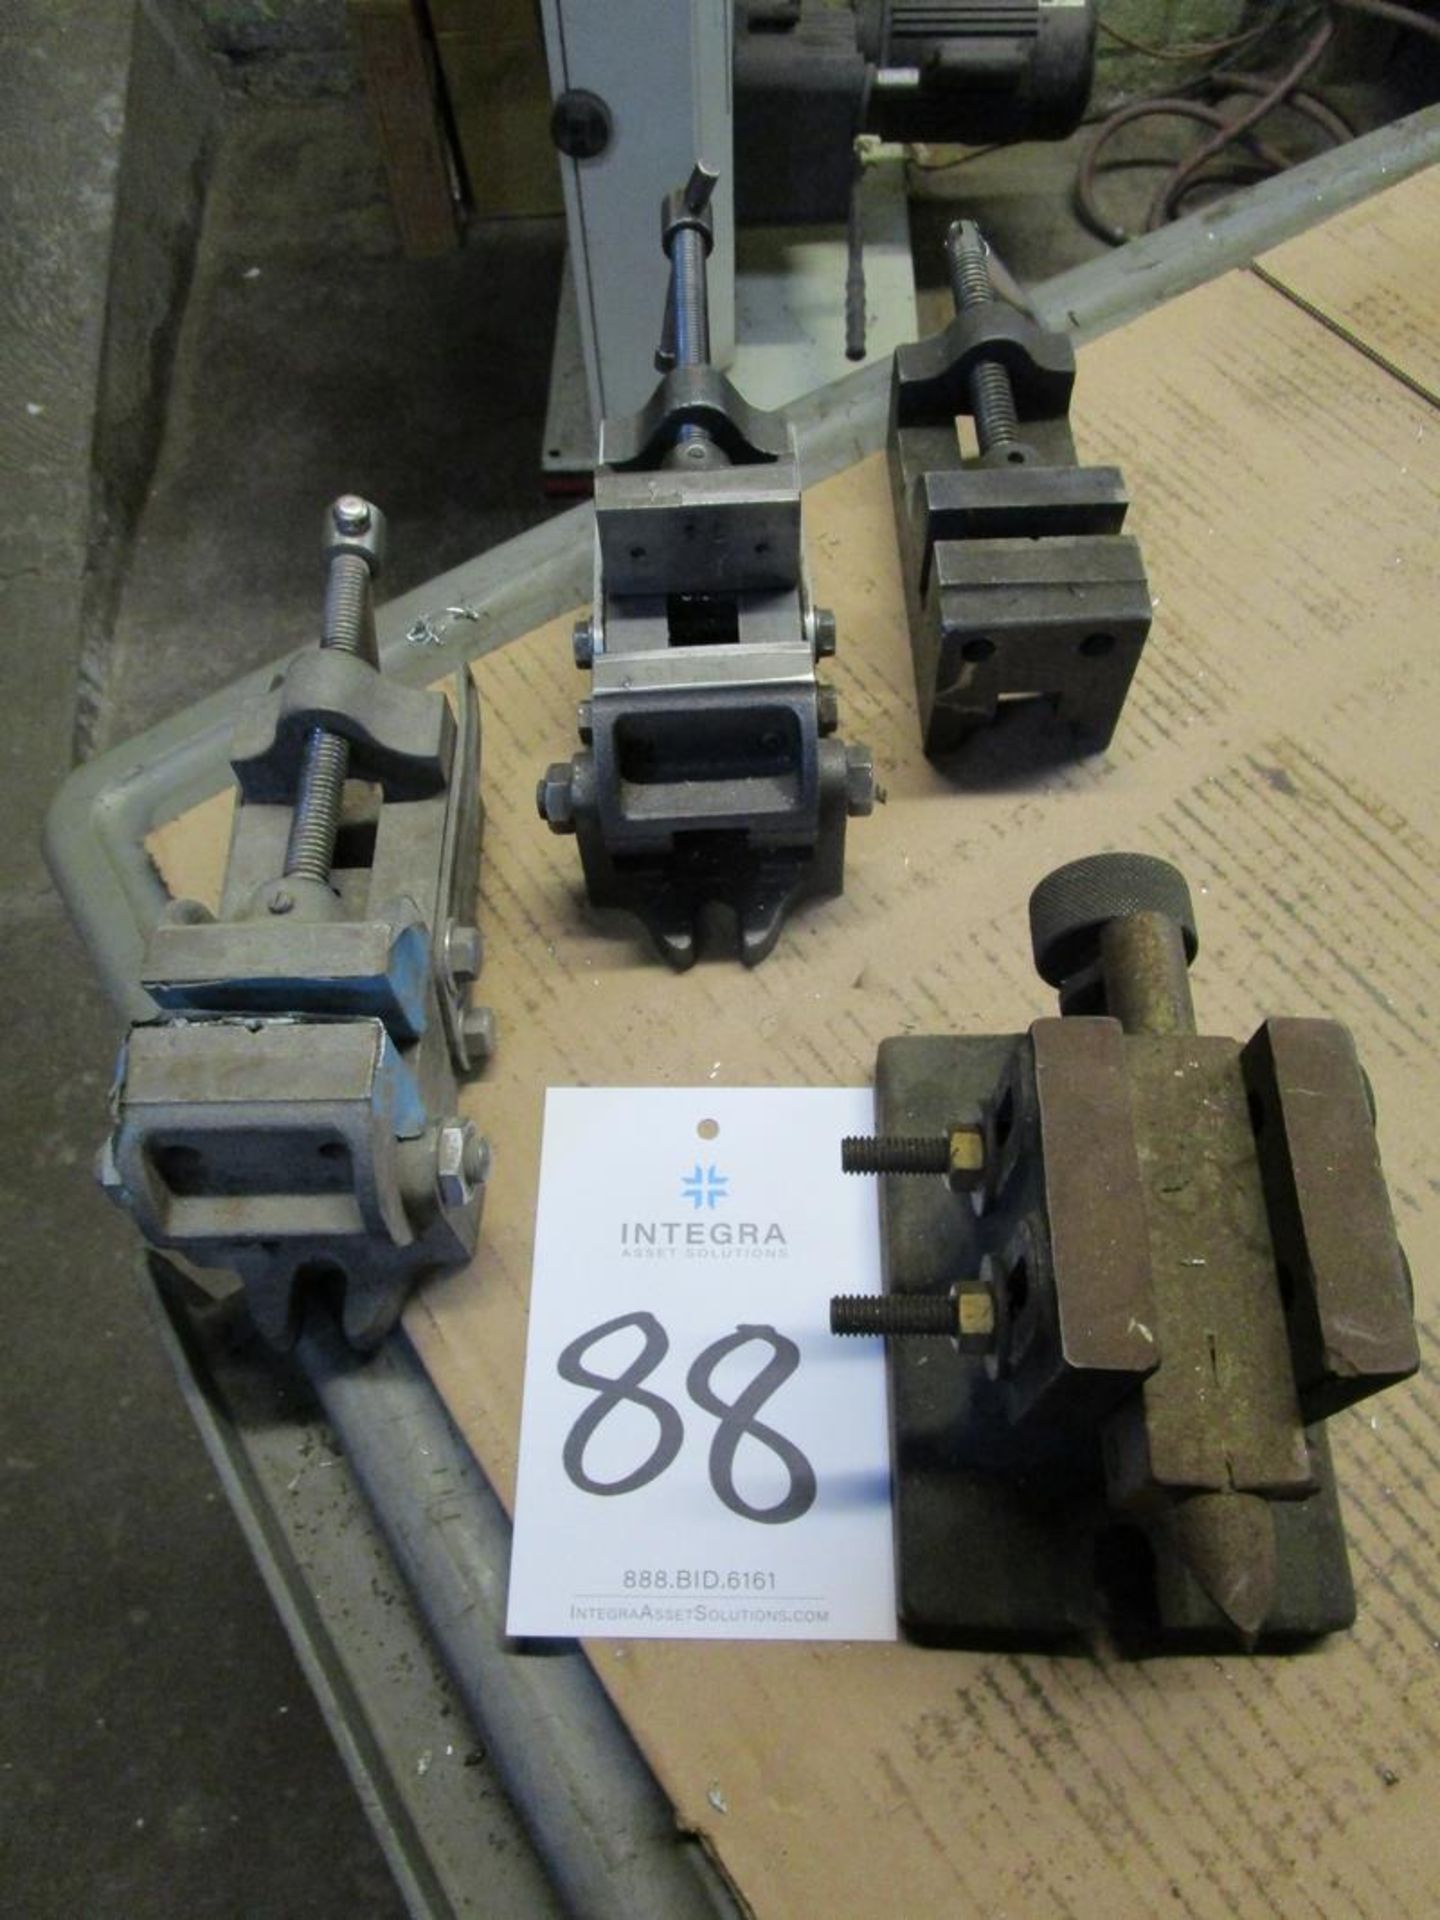 Specialty Milling Vises